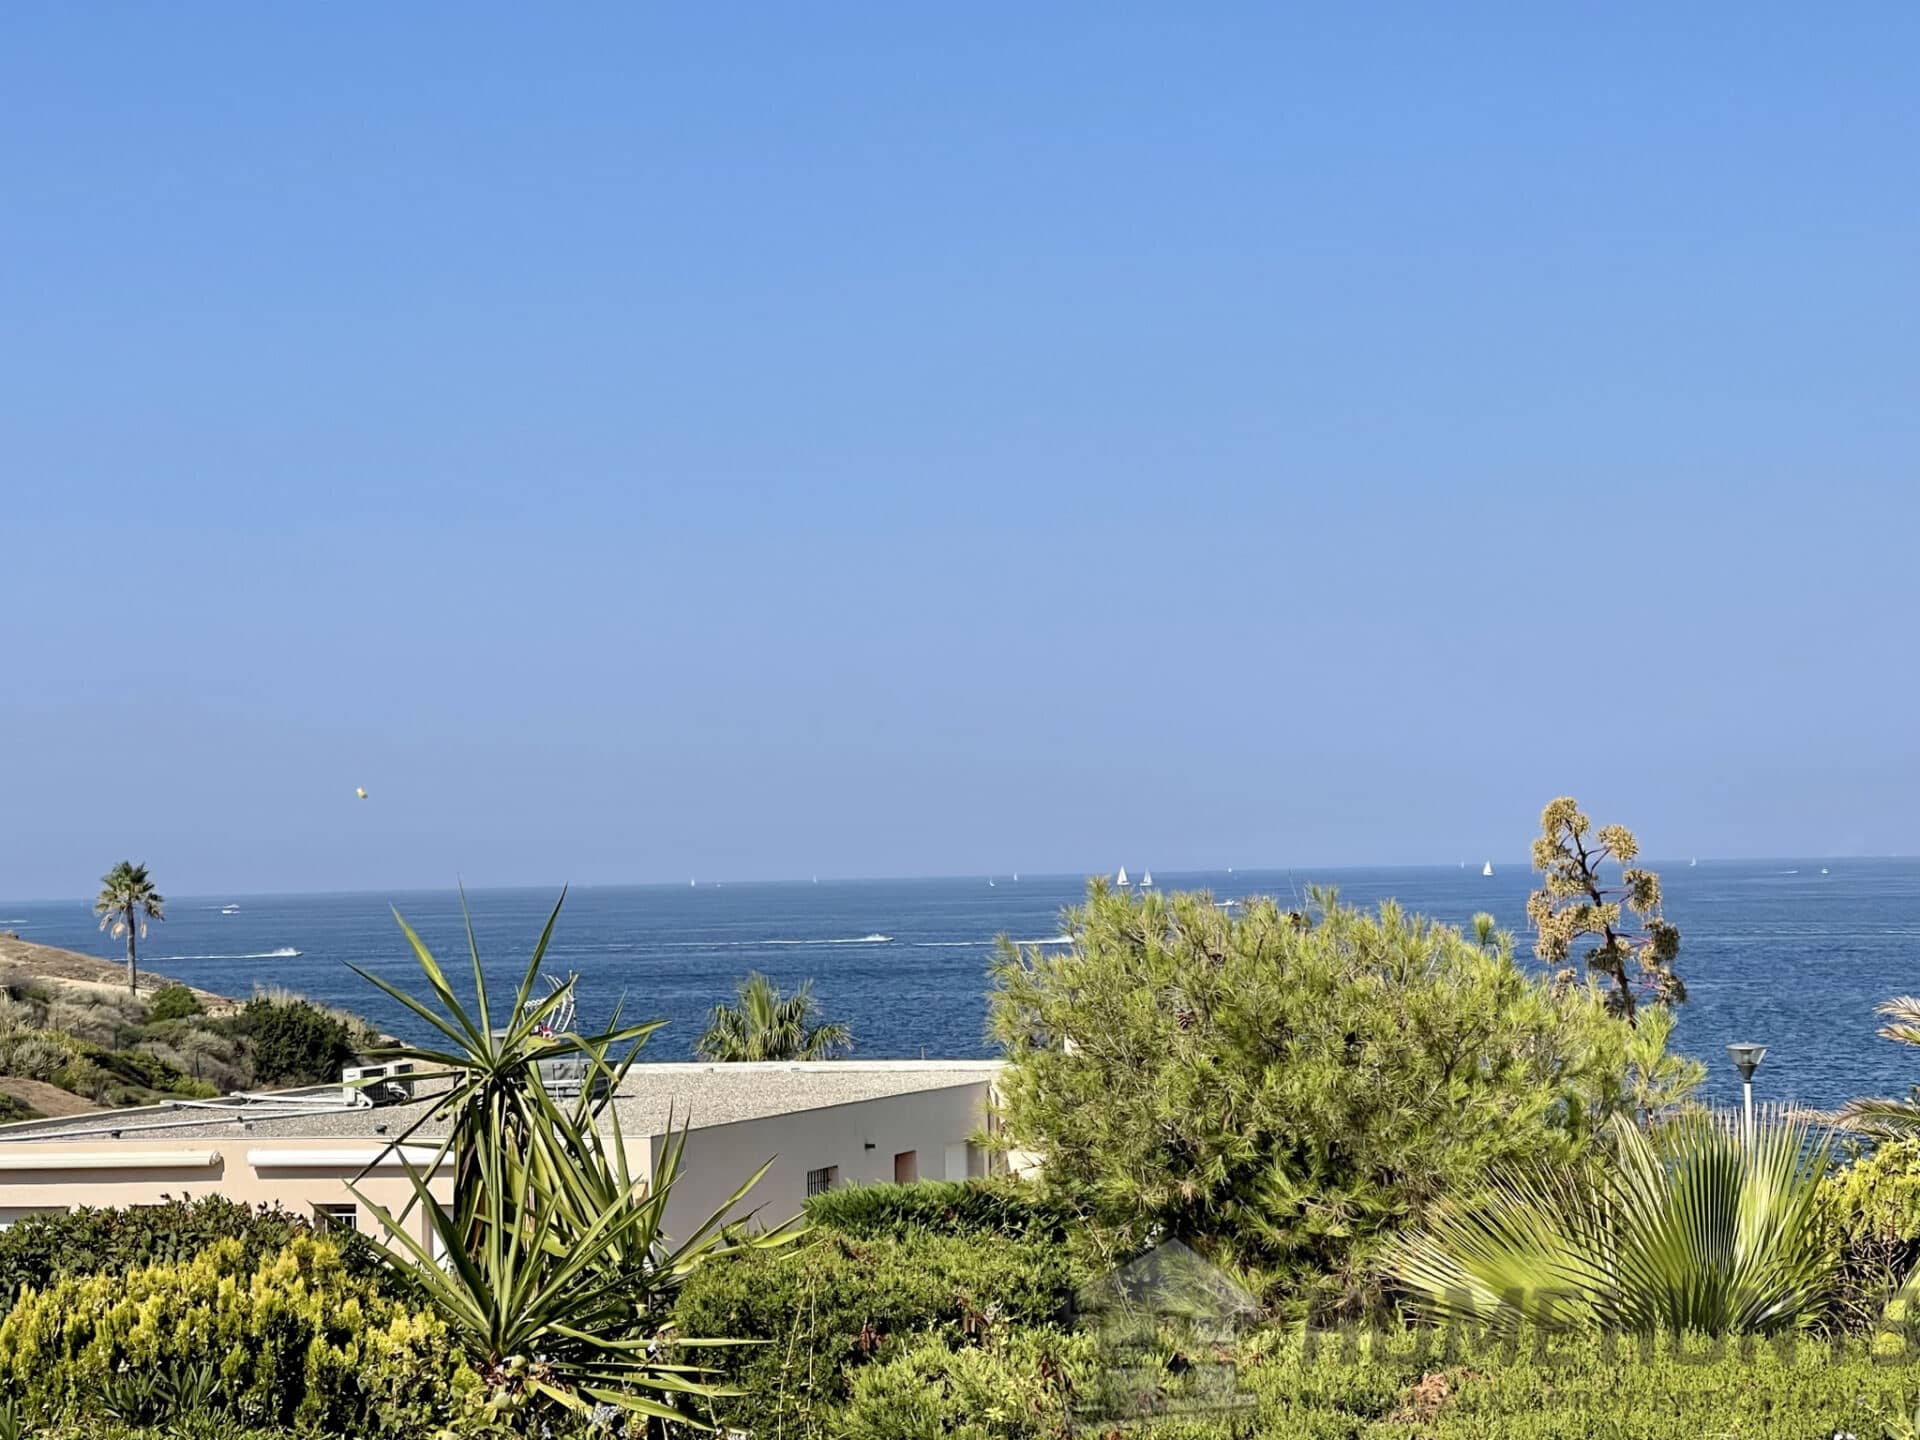 Villa/House For Sale in Six Fours Les Plages 13